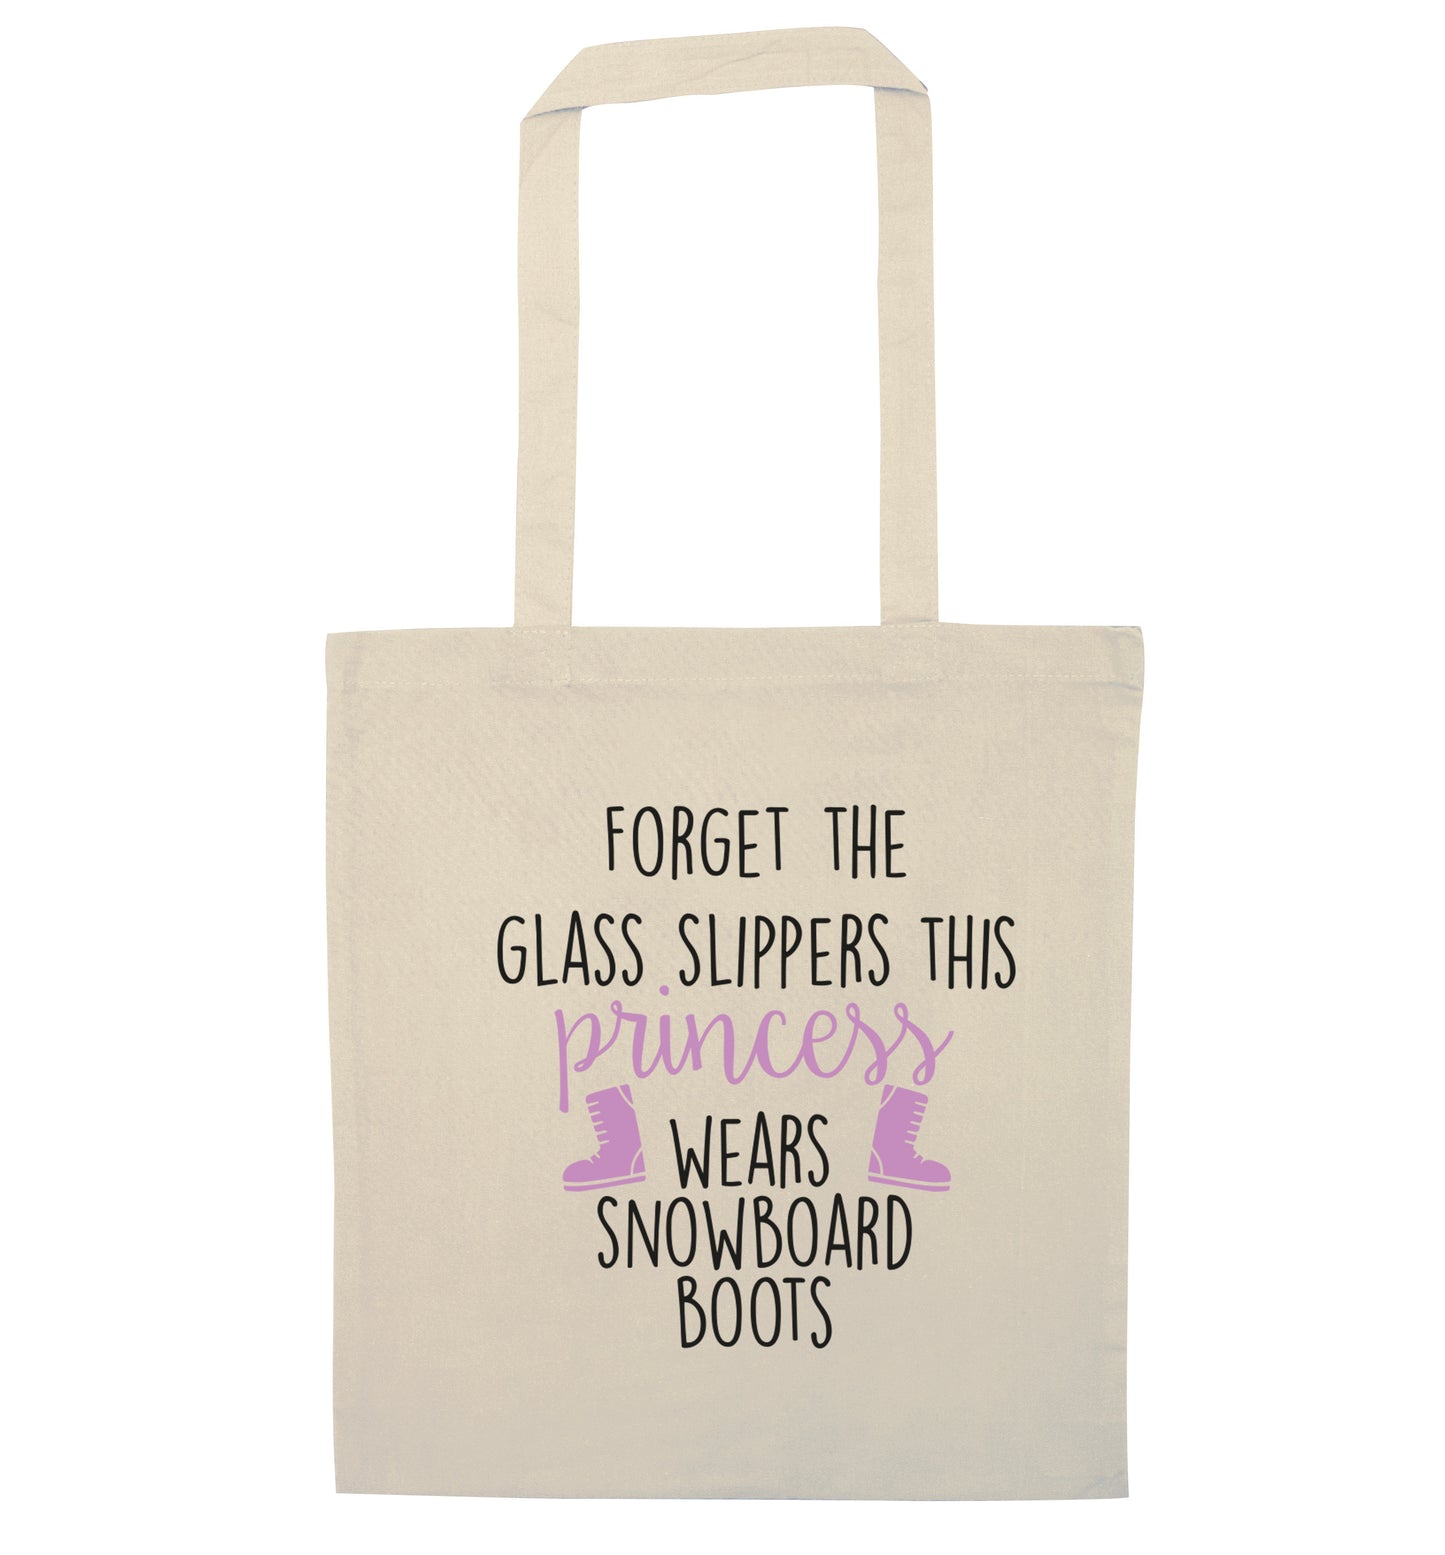 Forget the glass slippers this princess wears snowboard boots natural tote bag